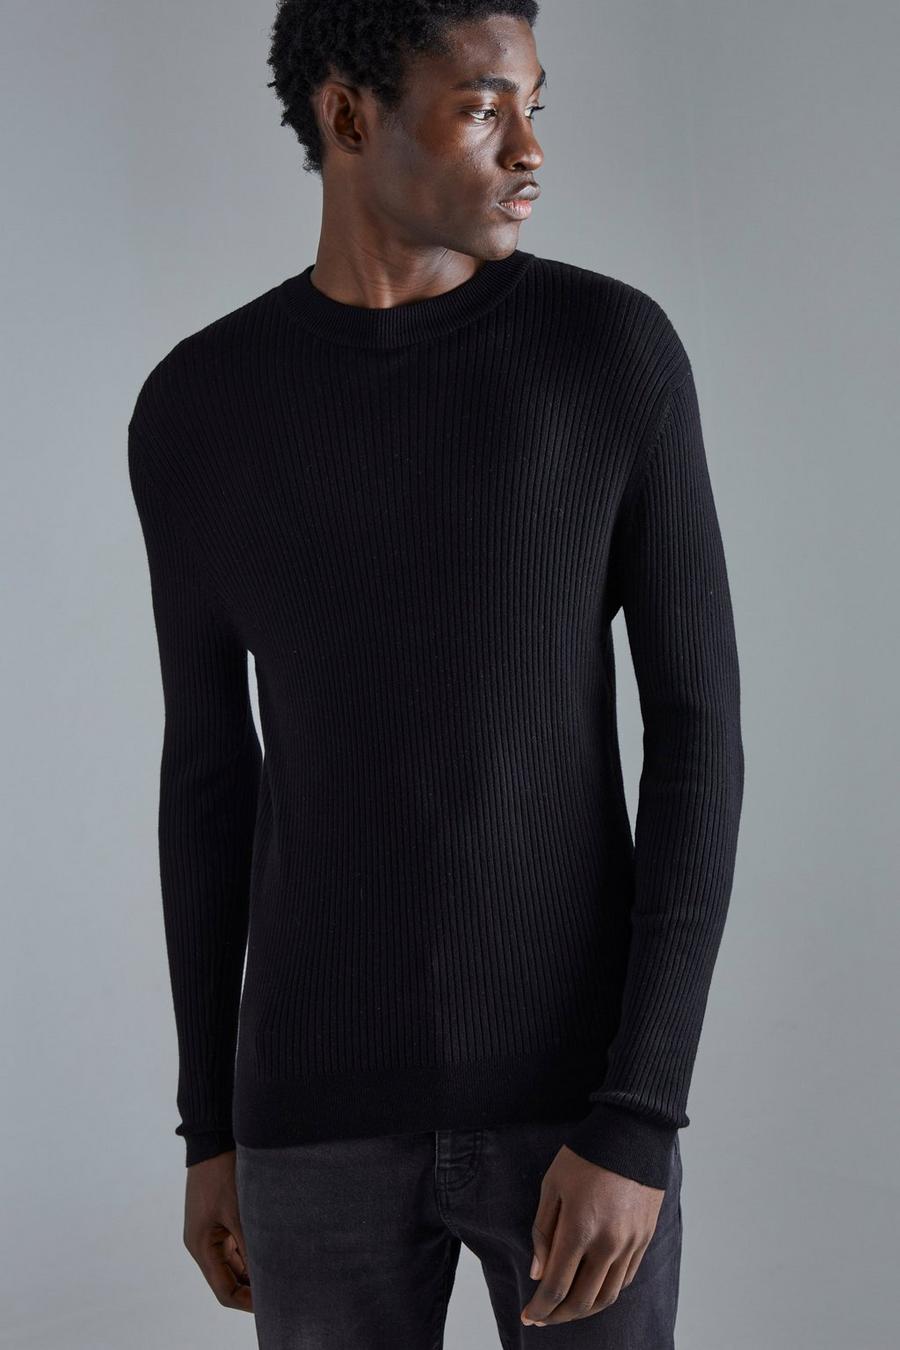 Black Muscle Fit Ribbed Extended Neck Jumper